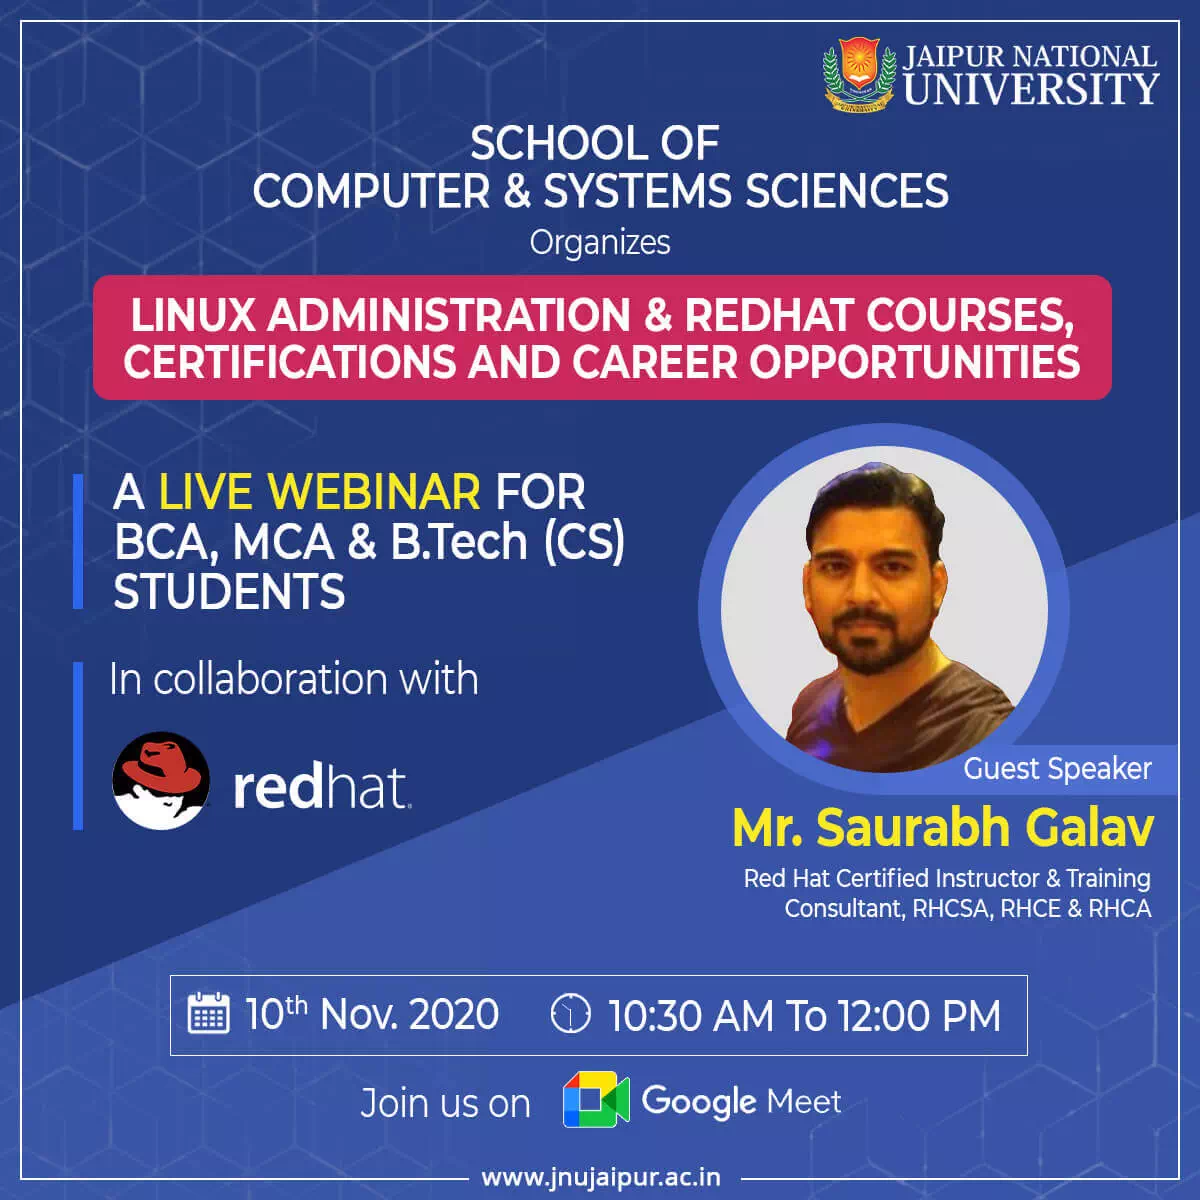 Webinar on Linux Administration & Red Hat Courses, Certifications and Career Opportunities